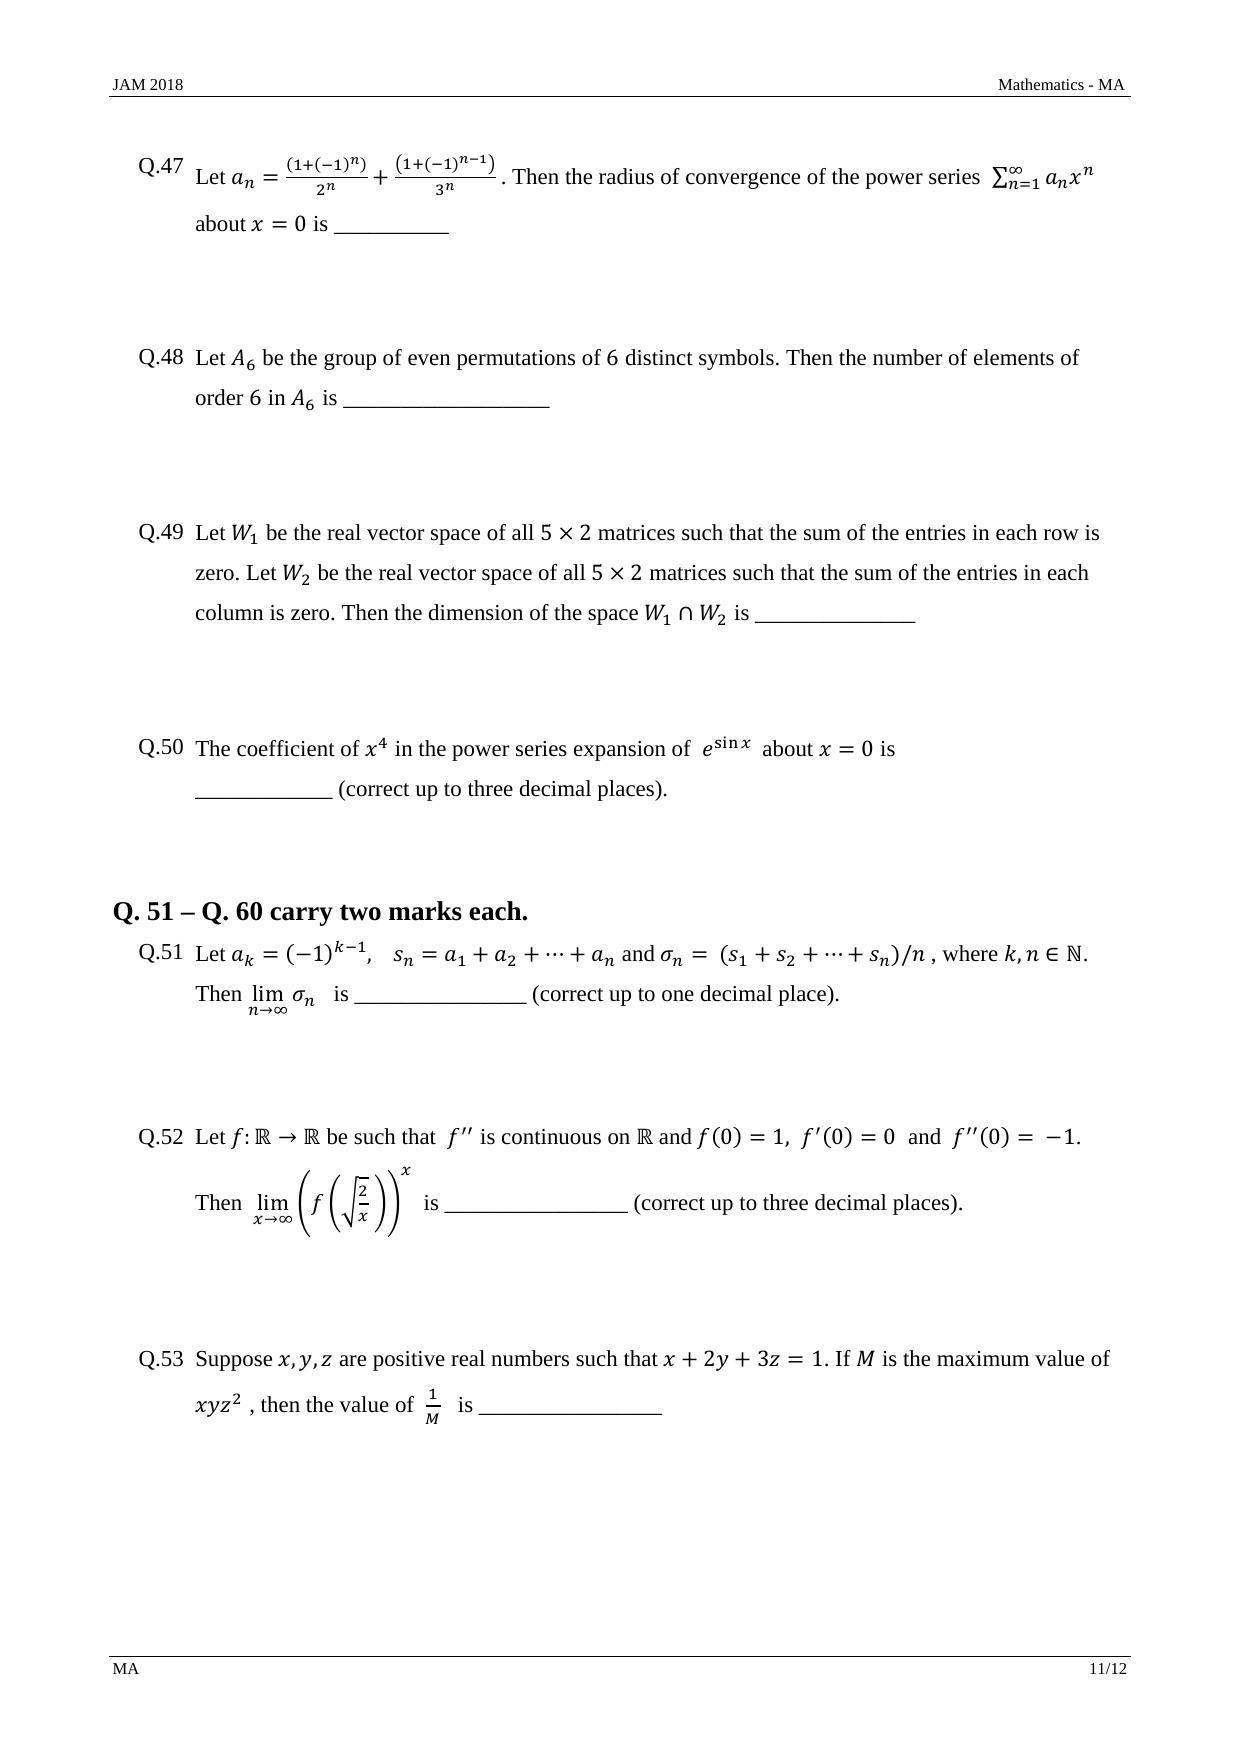 JAM 2018: MA Question Paper - Page 11